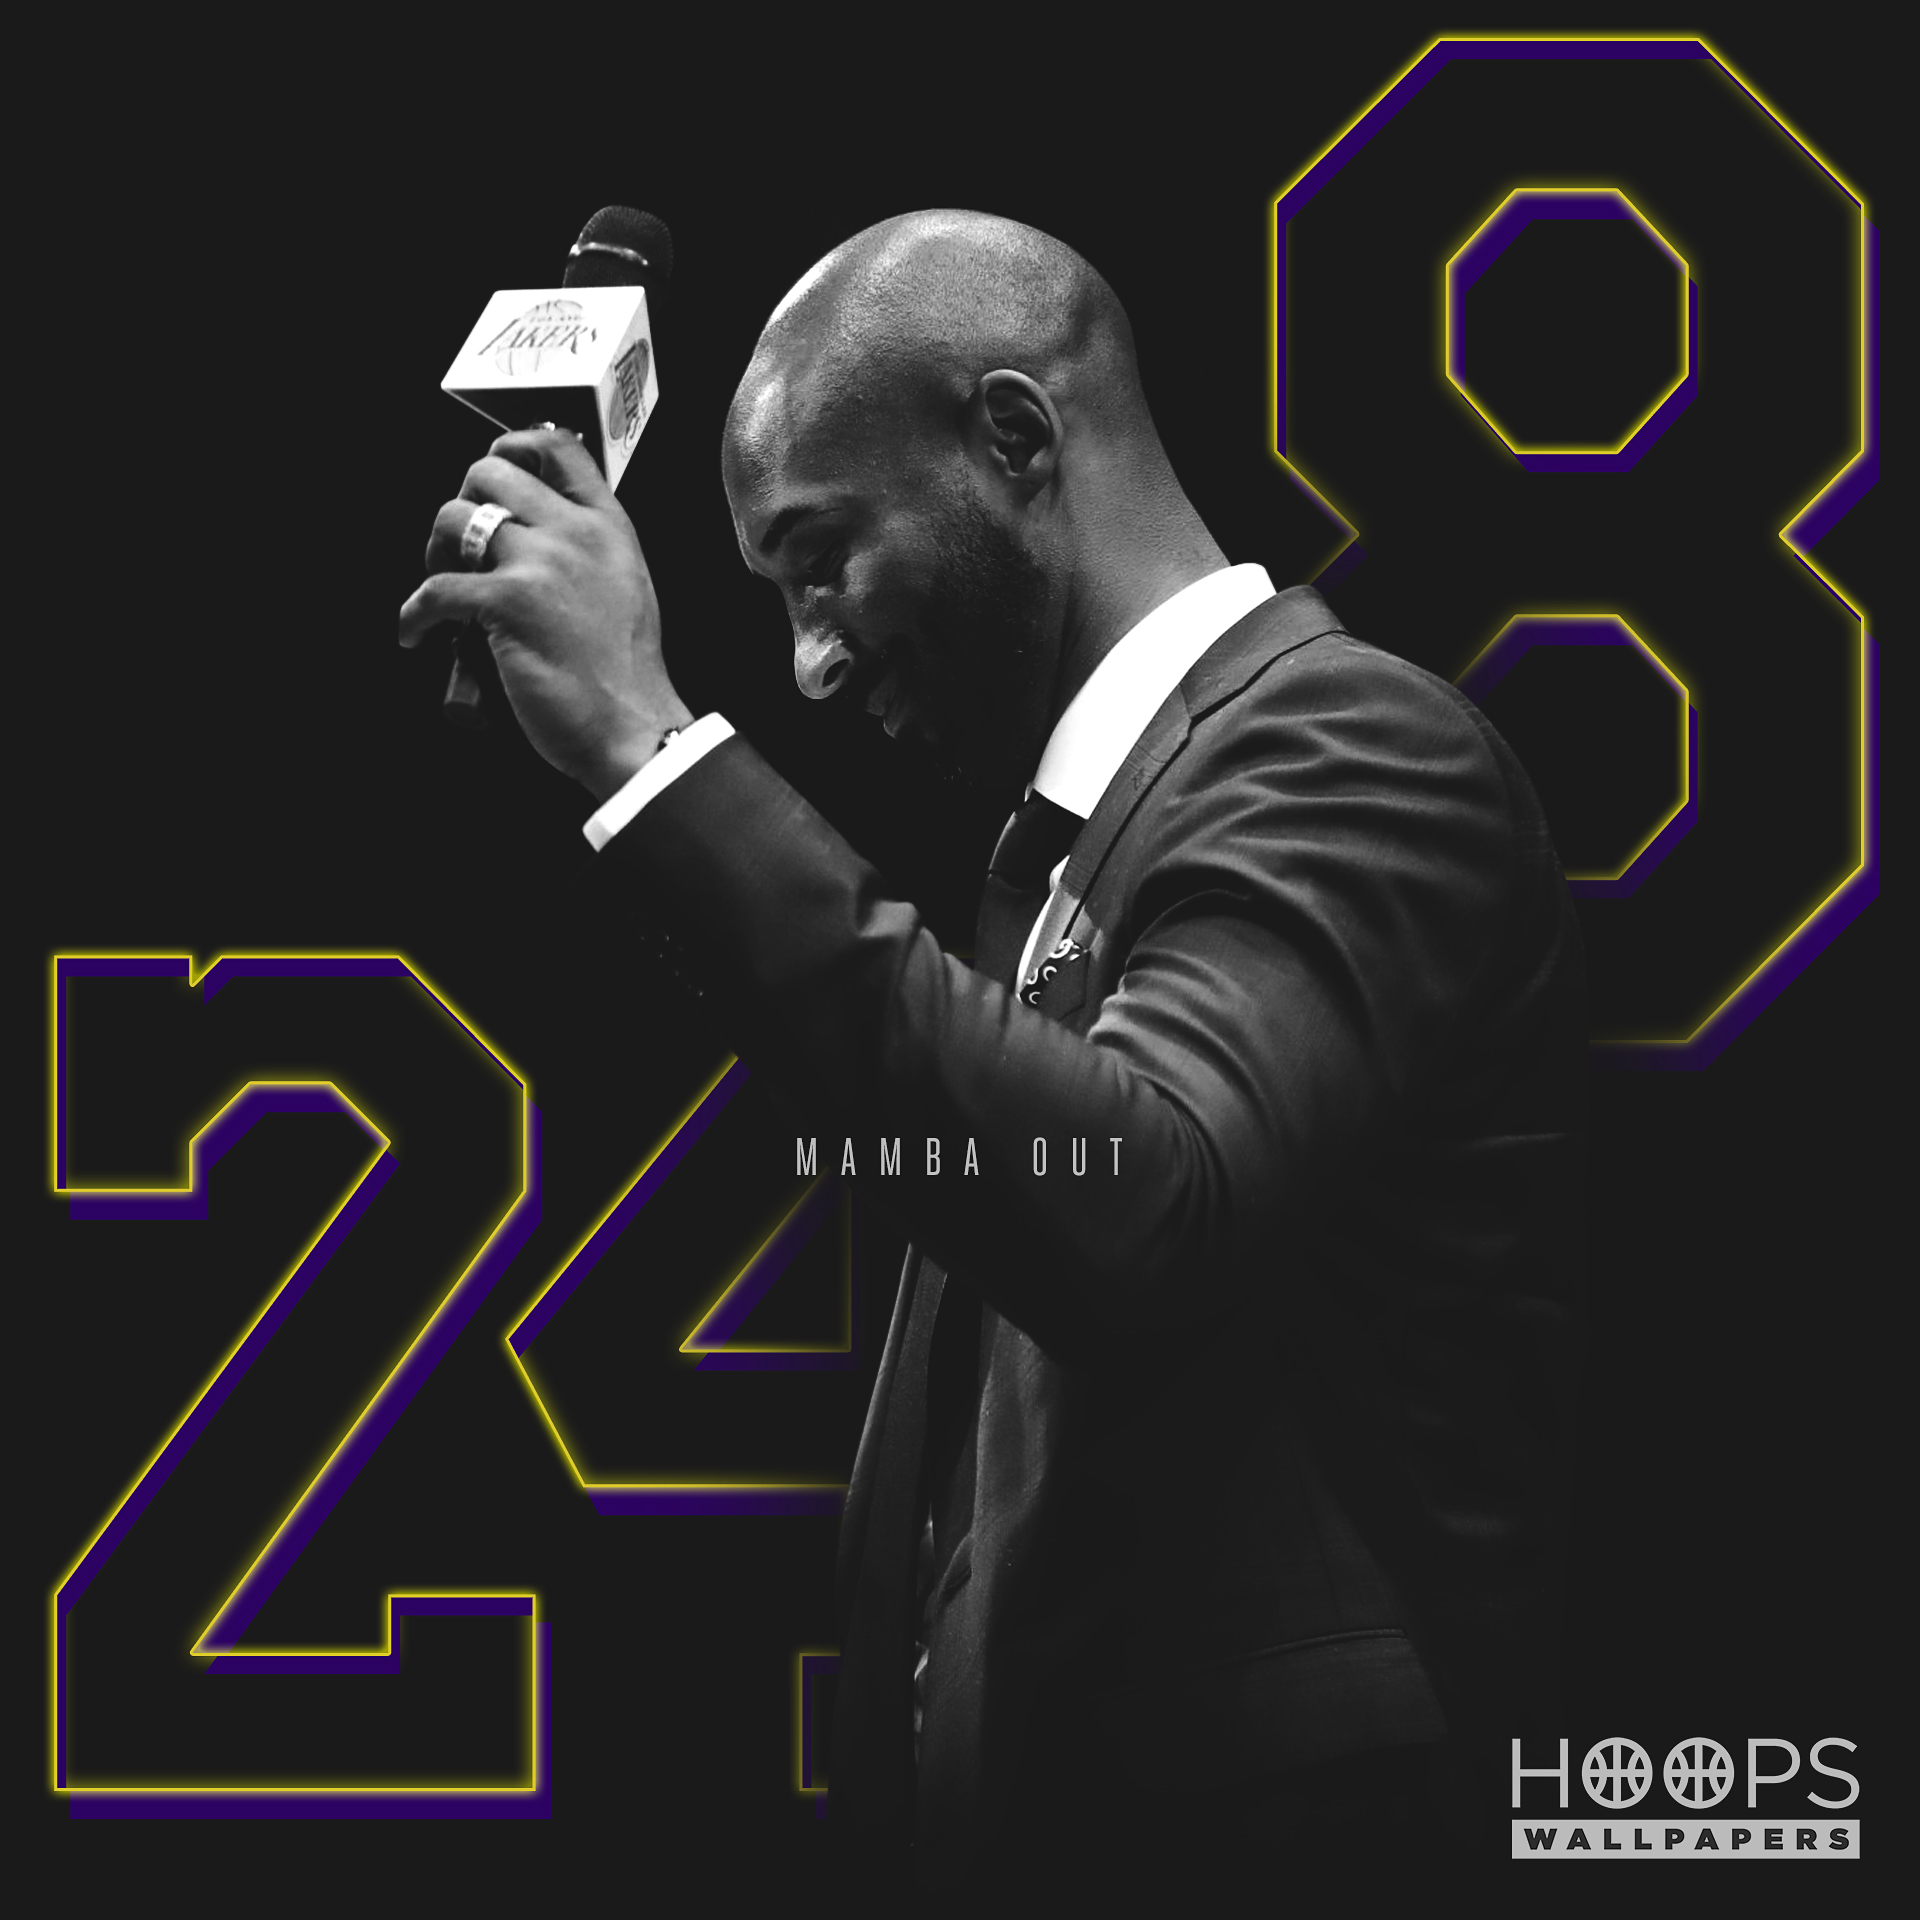 Hoopswallpapers Com Get The Latest Hd And Mobile Nba Wallpapers Today Blog Archive New Kobe Bryant Jersey Retirement Wallpaper Hoopswallpapers Com Get The Latest Hd And Mobile Nba Wallpapers Today